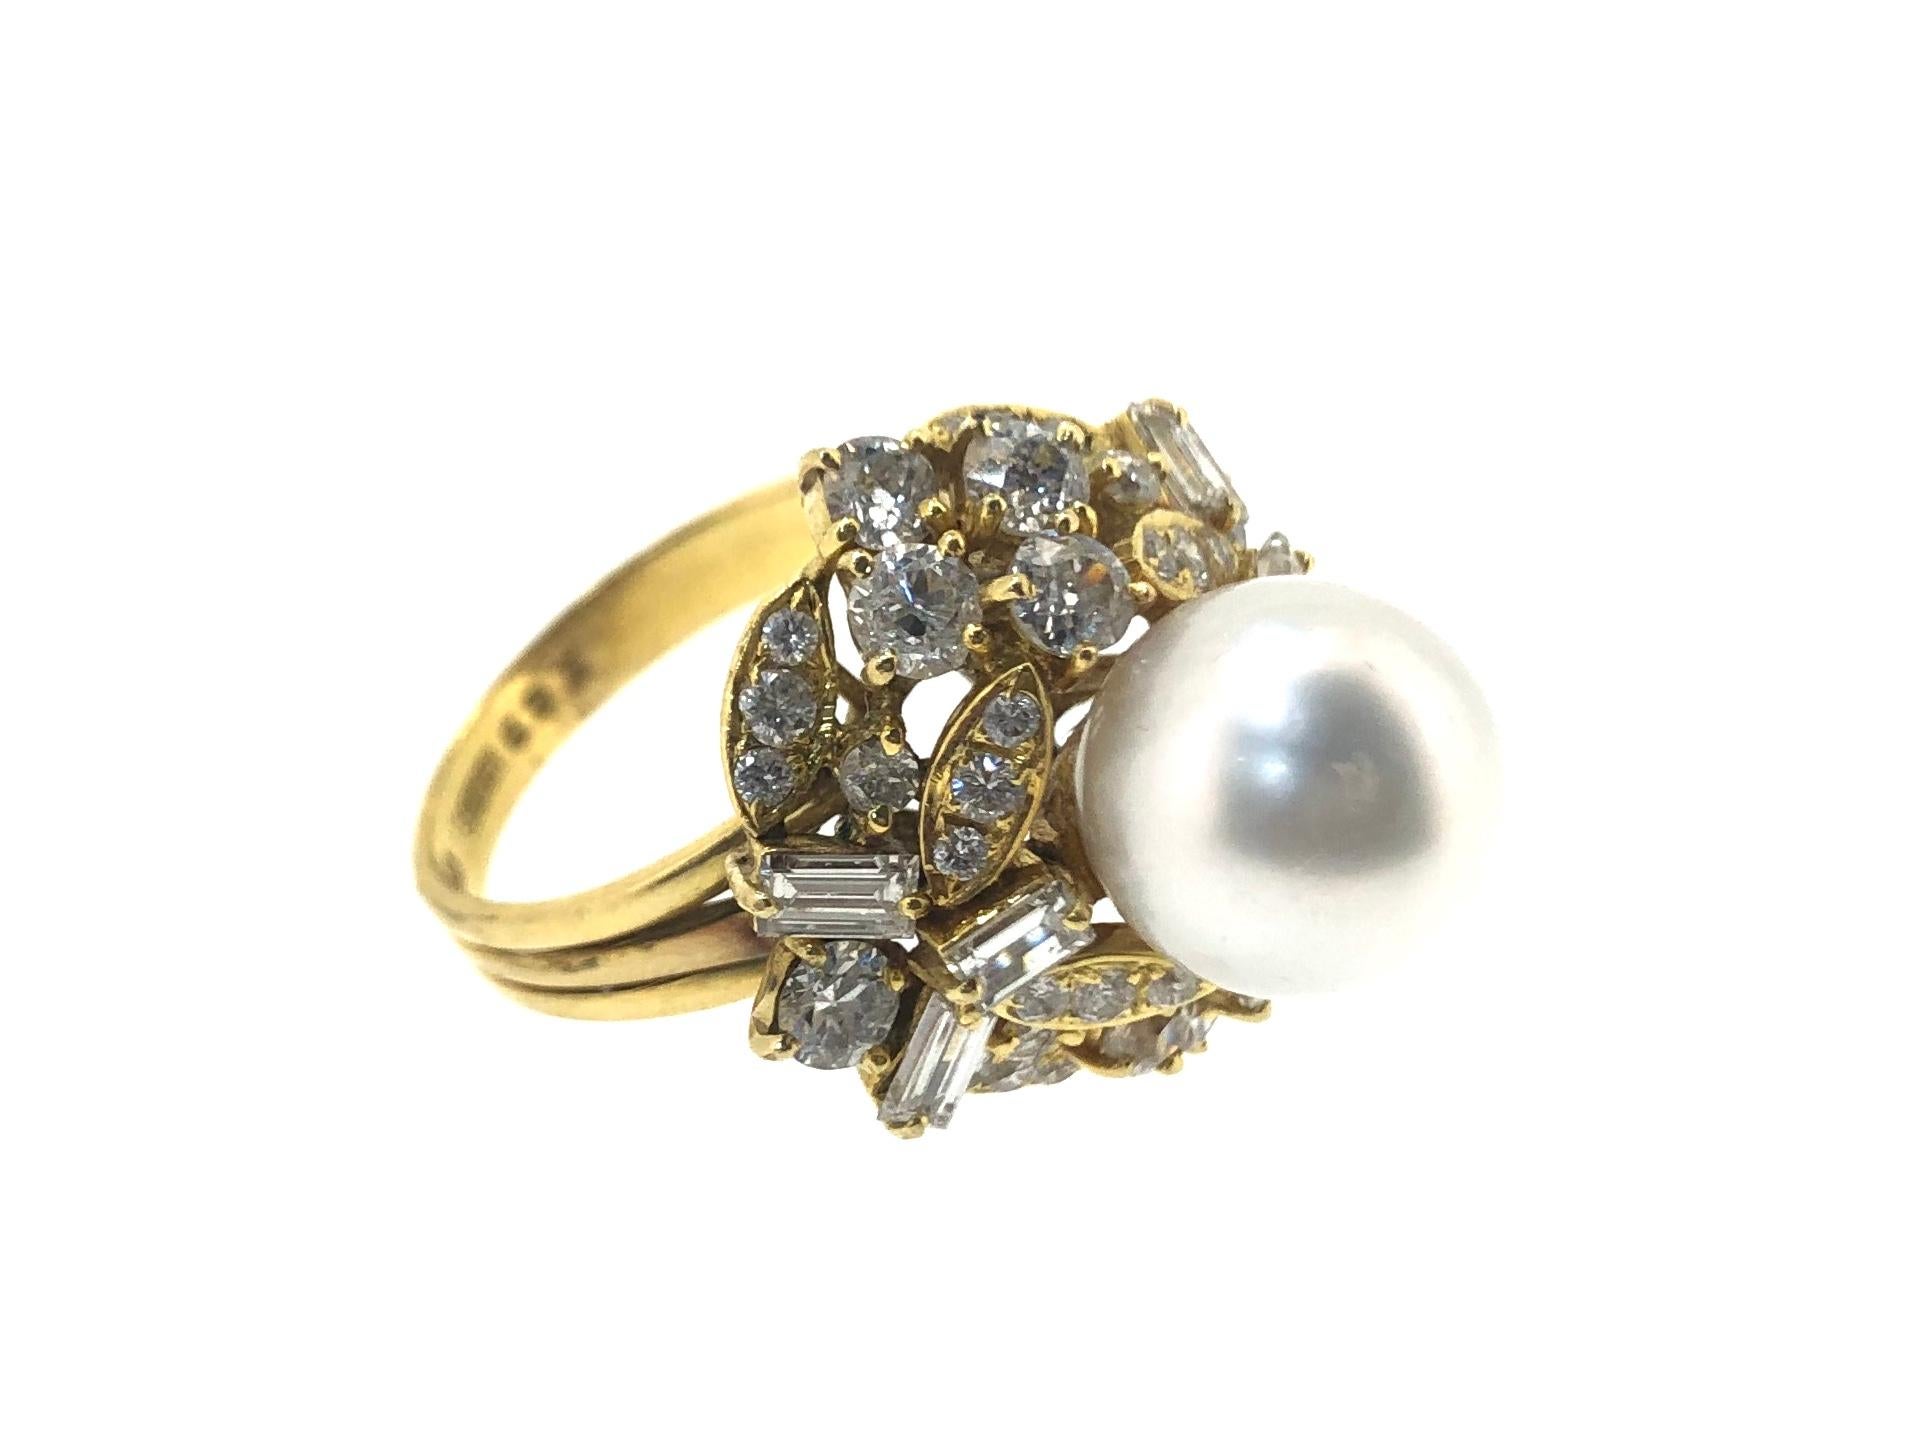 Sena South Sea Pearl and Diamond Cocktail Ring. Set with 44 round brilliant cut Diamonds in 18ct Yellow gold. Hallmarked SENA 

Approximate Pearl Size : 11mm
Approximate total diamond weight : 3.00ct
Ring Size : P
Total Weight : 12.4g
Approximate